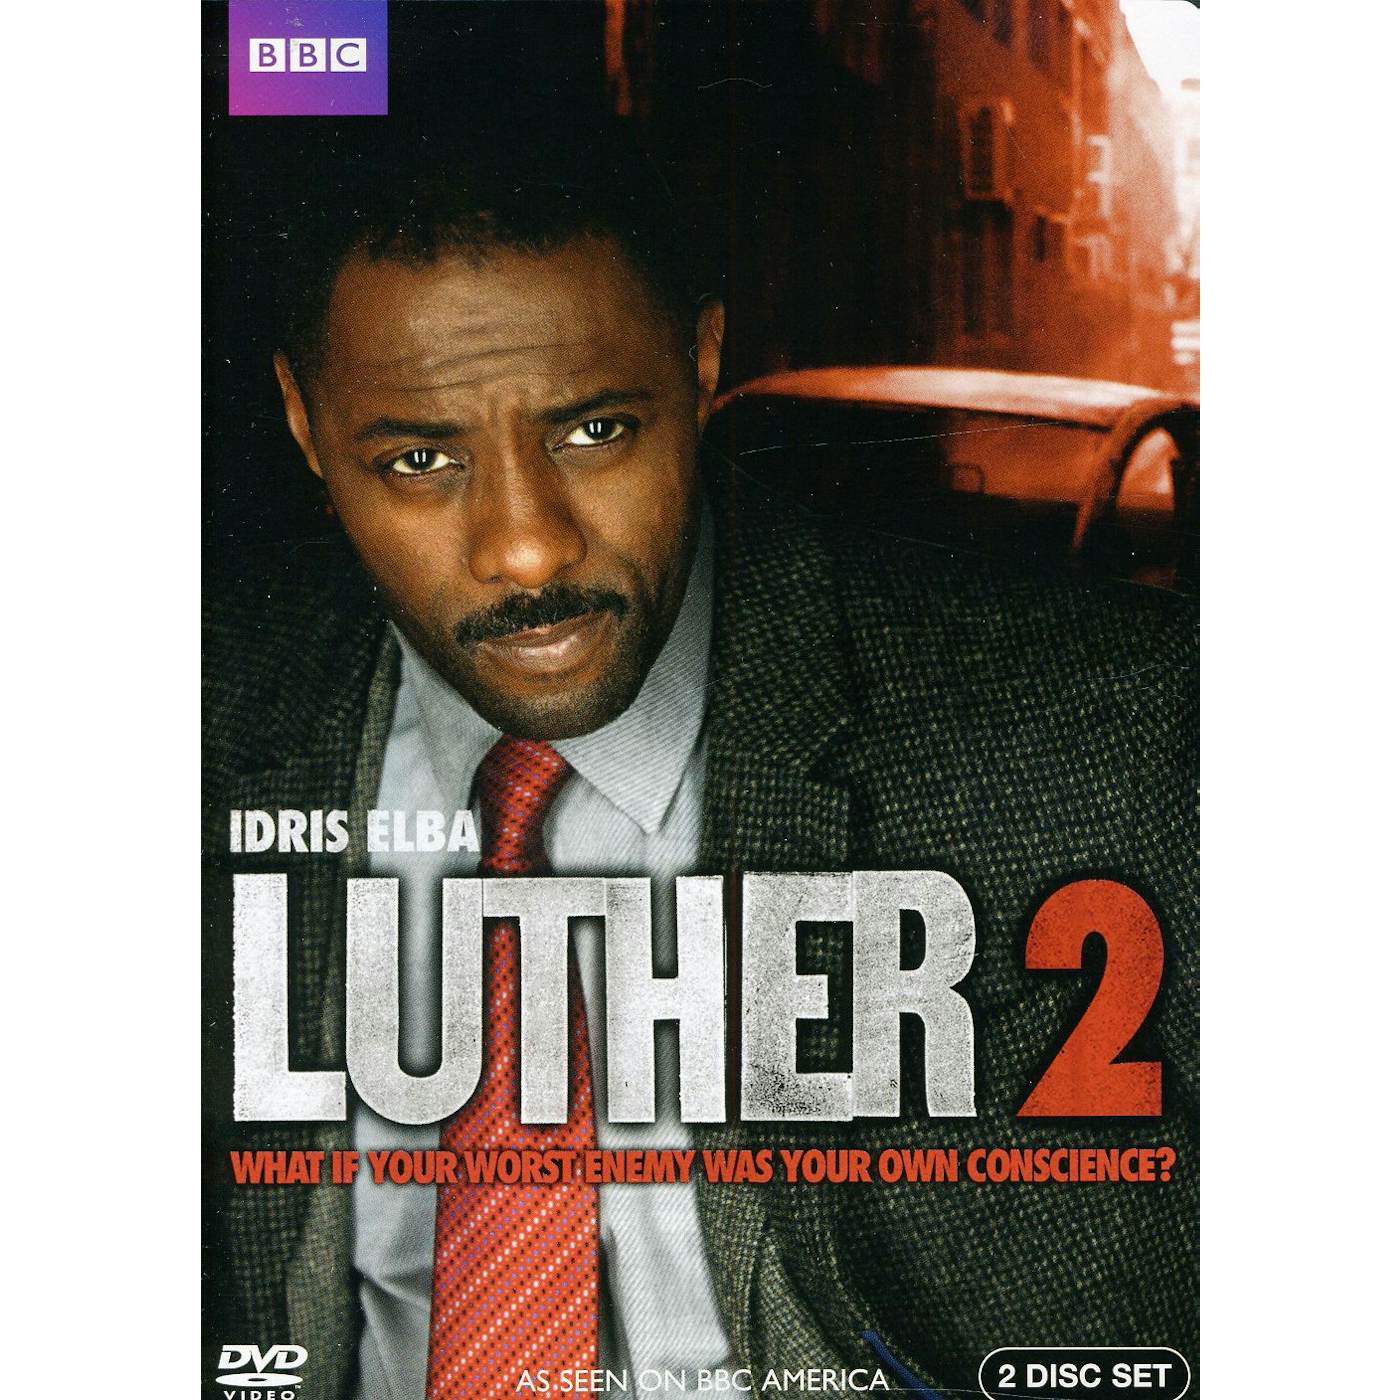 LUTHER (2010) DVD